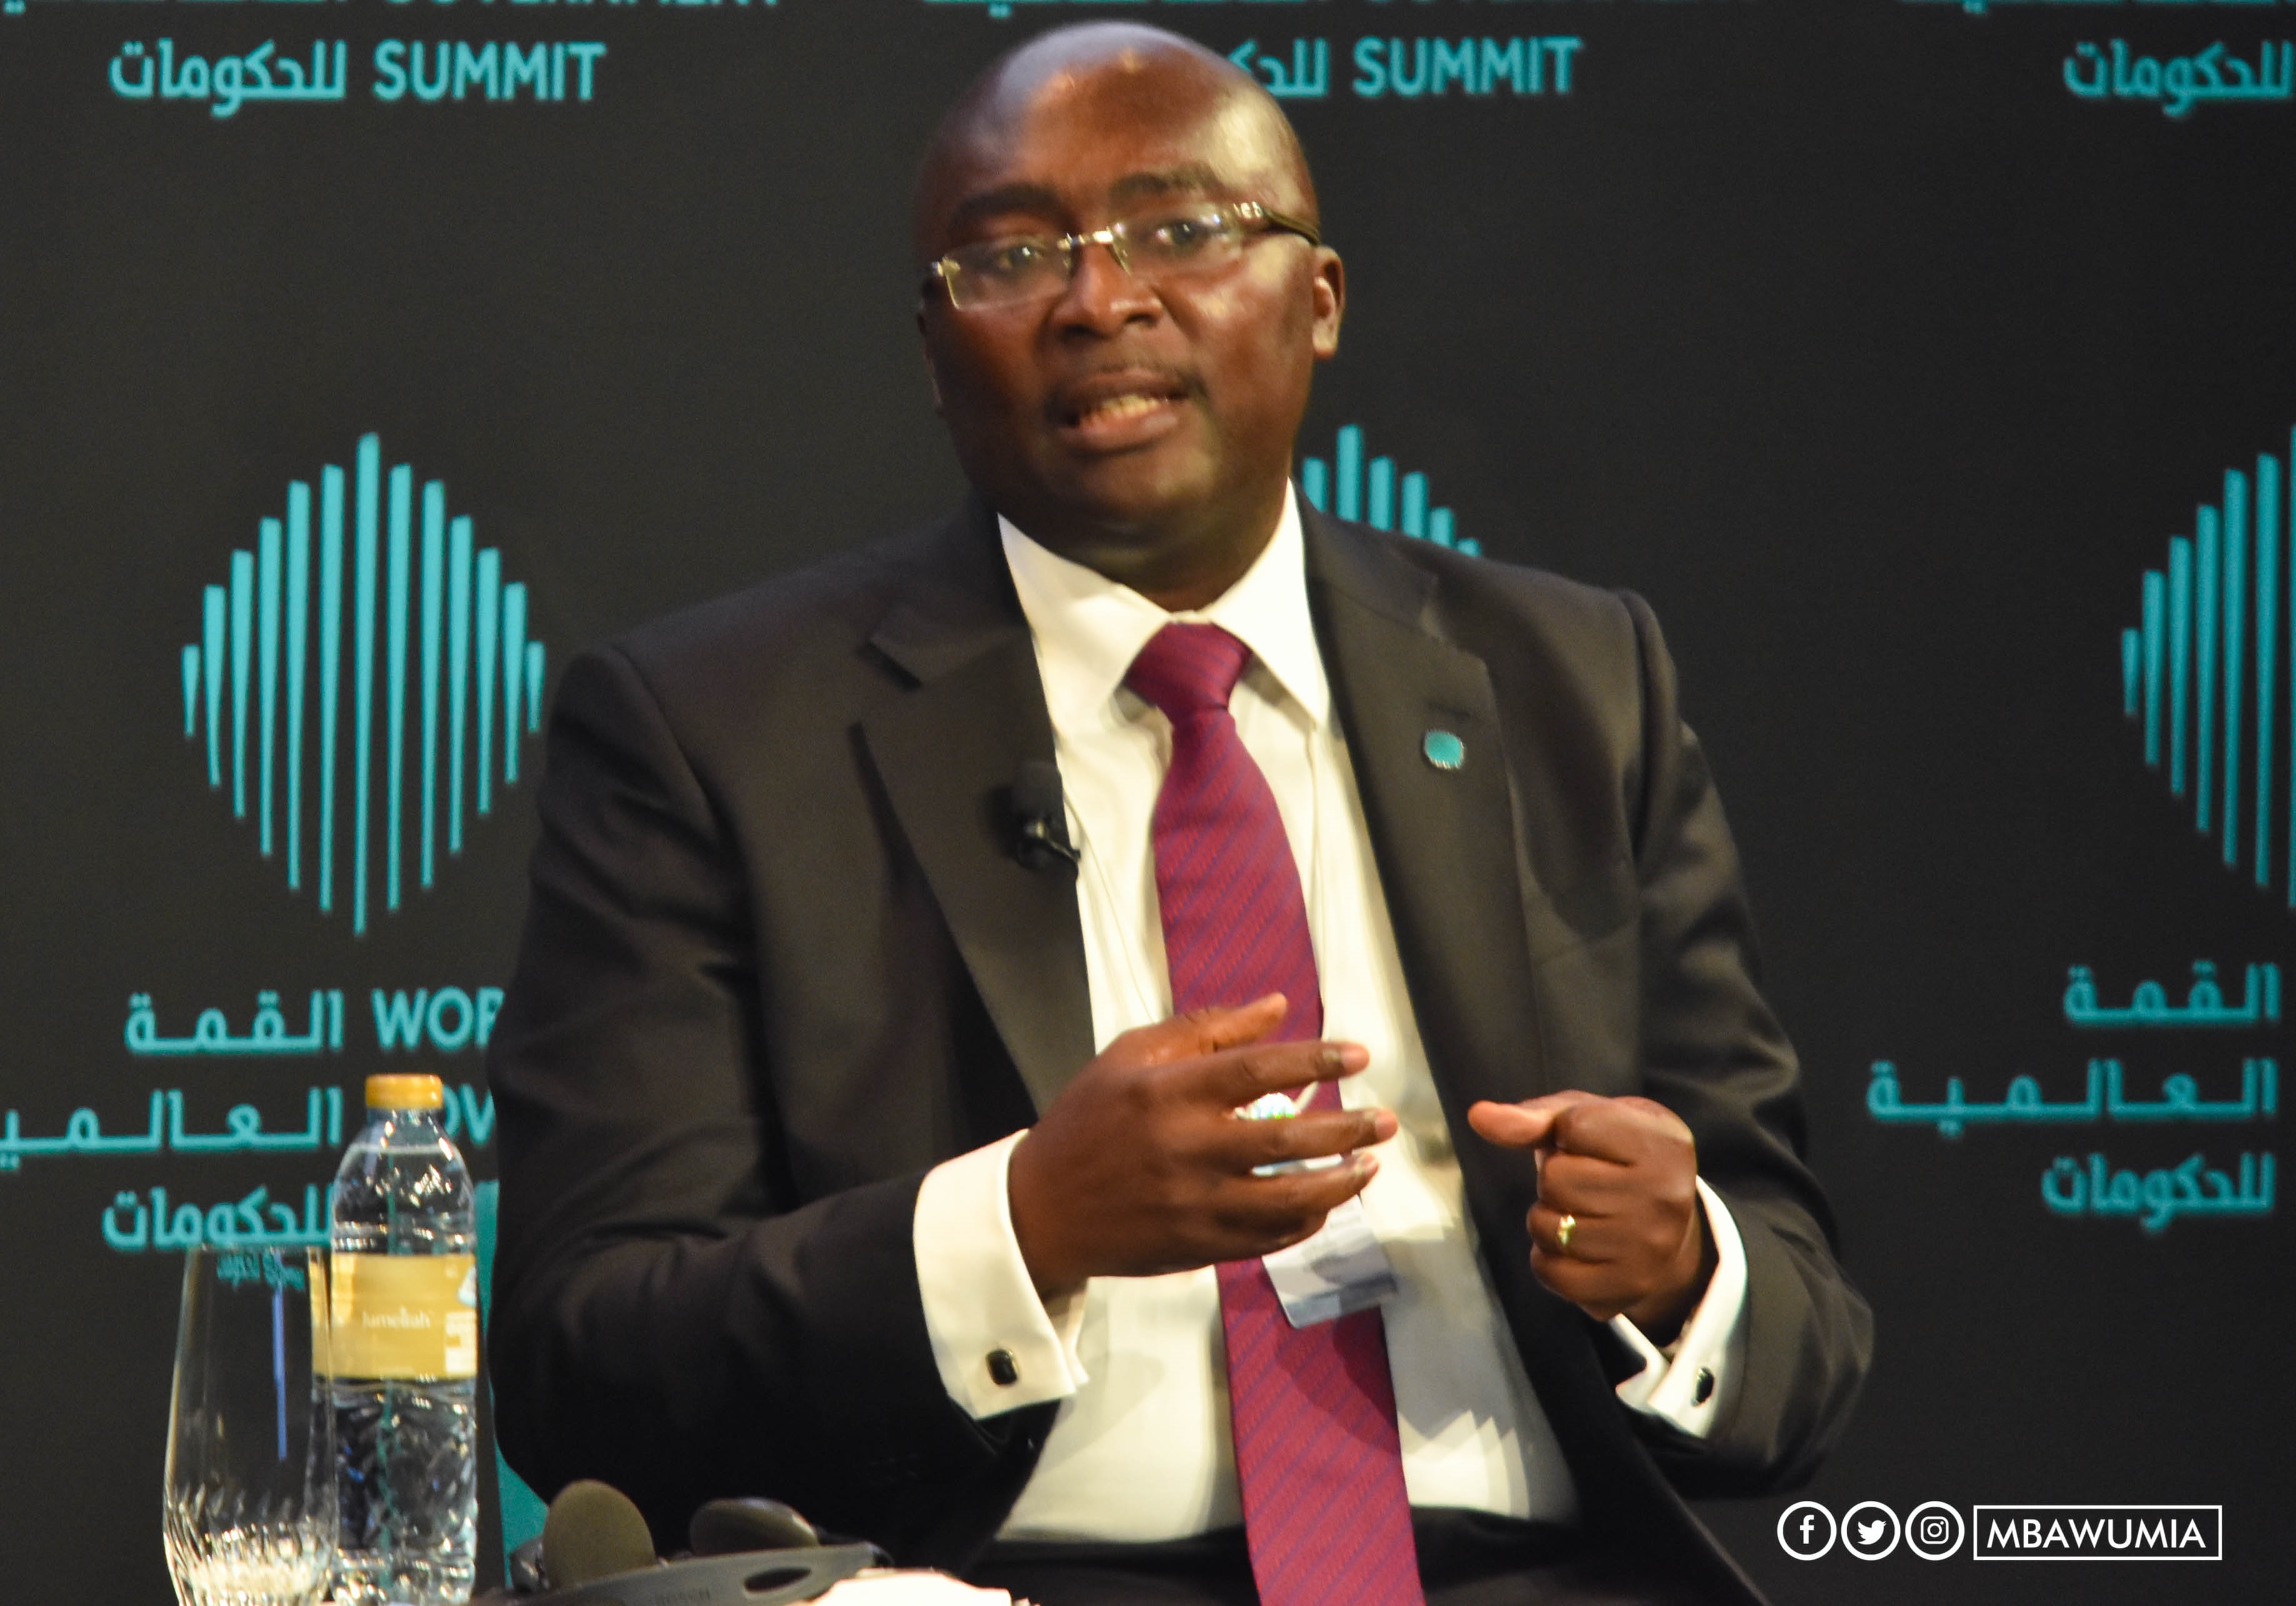 Govt’s focus is to limit aid, dependency- Dr. Bawumia